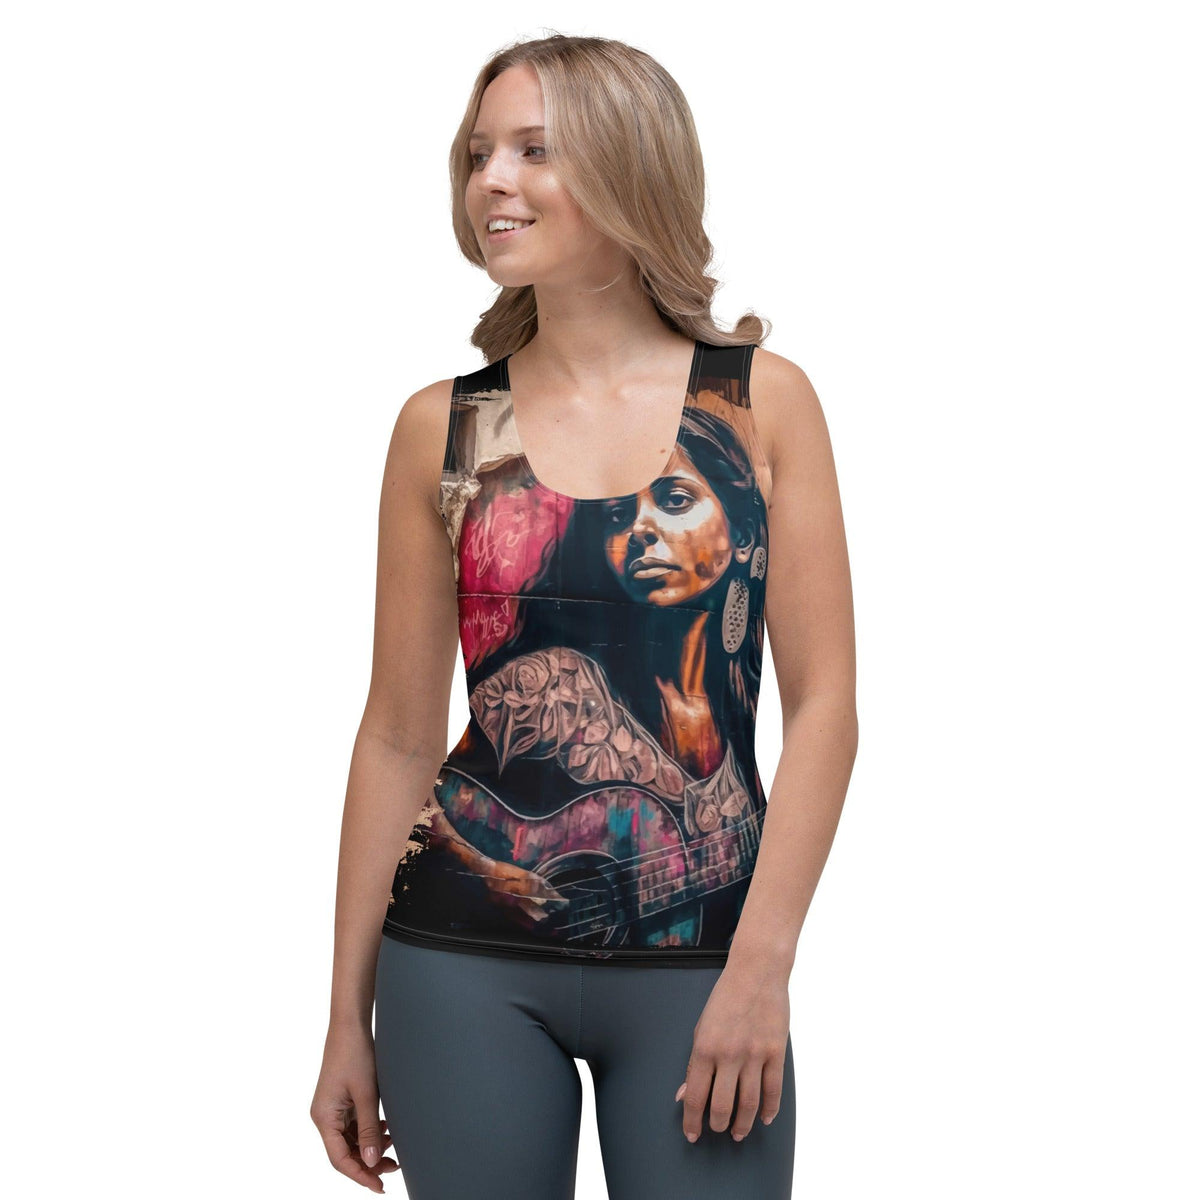 Strings Convey Her Heart Sublimation Cut & Sew Tank Top - Beyond T-shirts